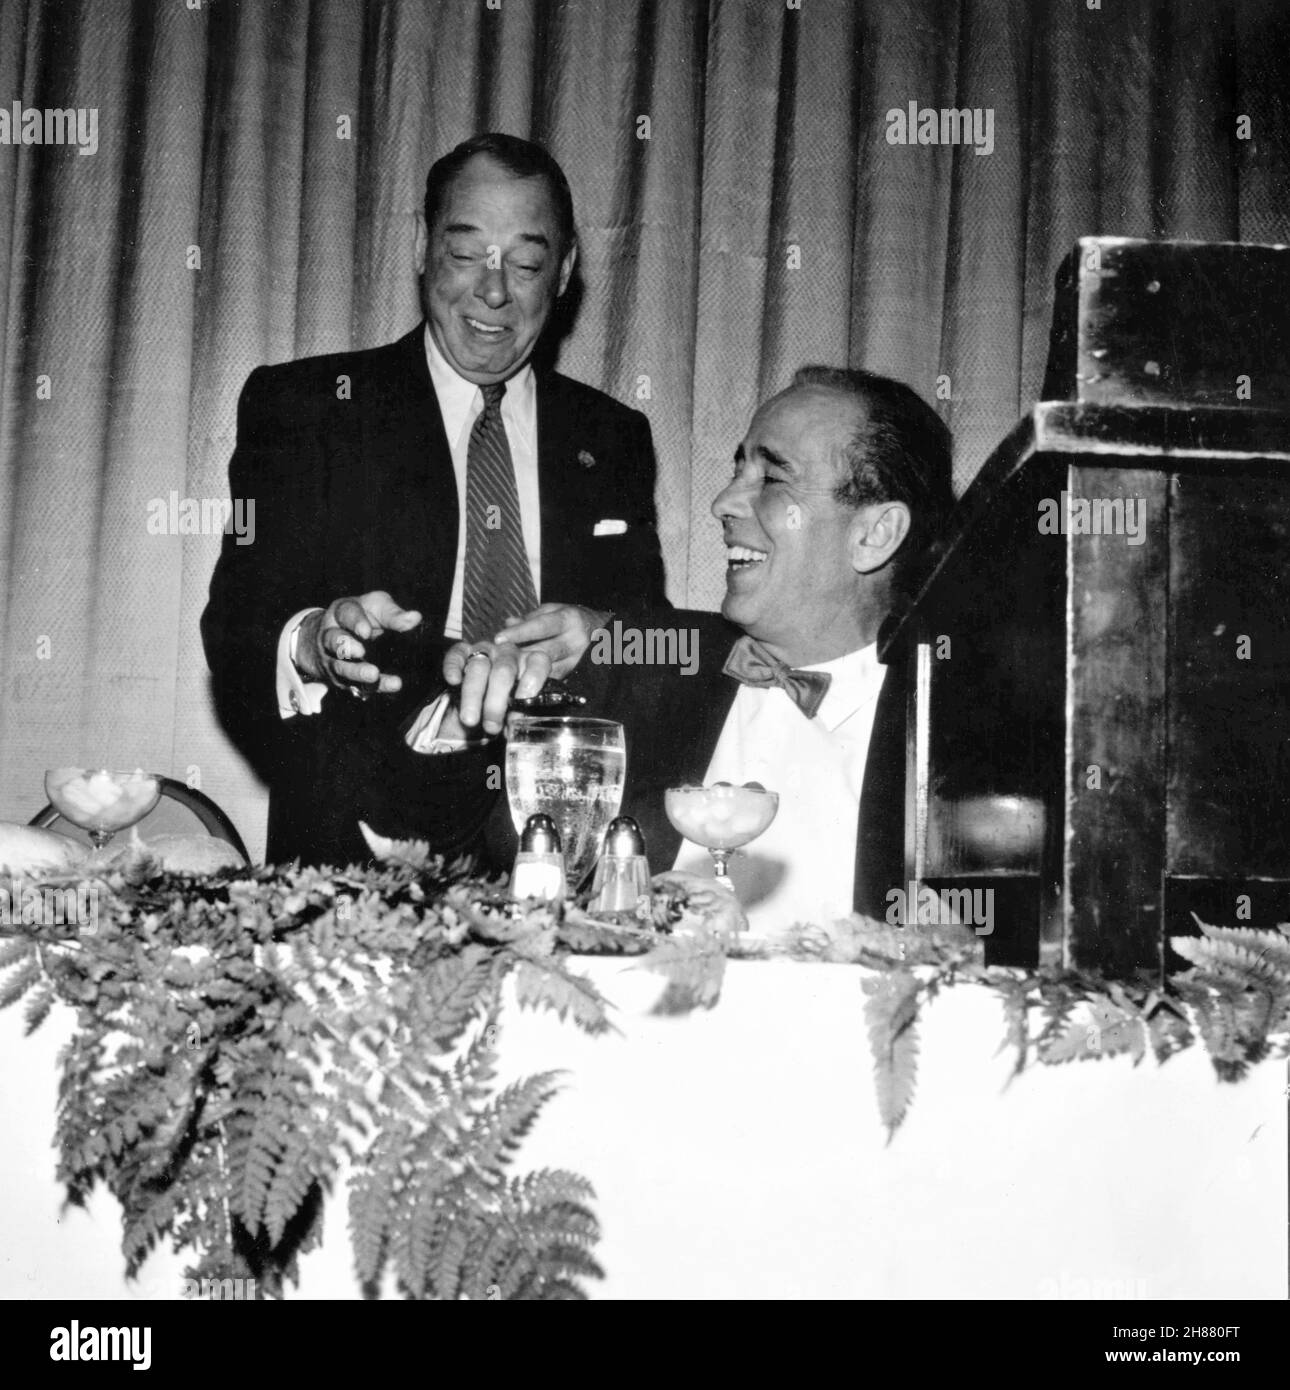 HUMPHREY BOGART candid photo with comedian JOE E. LEWIS during his afternoon NEW YORK FRIARS CLUB ROAST in September 1955 Stock Photo